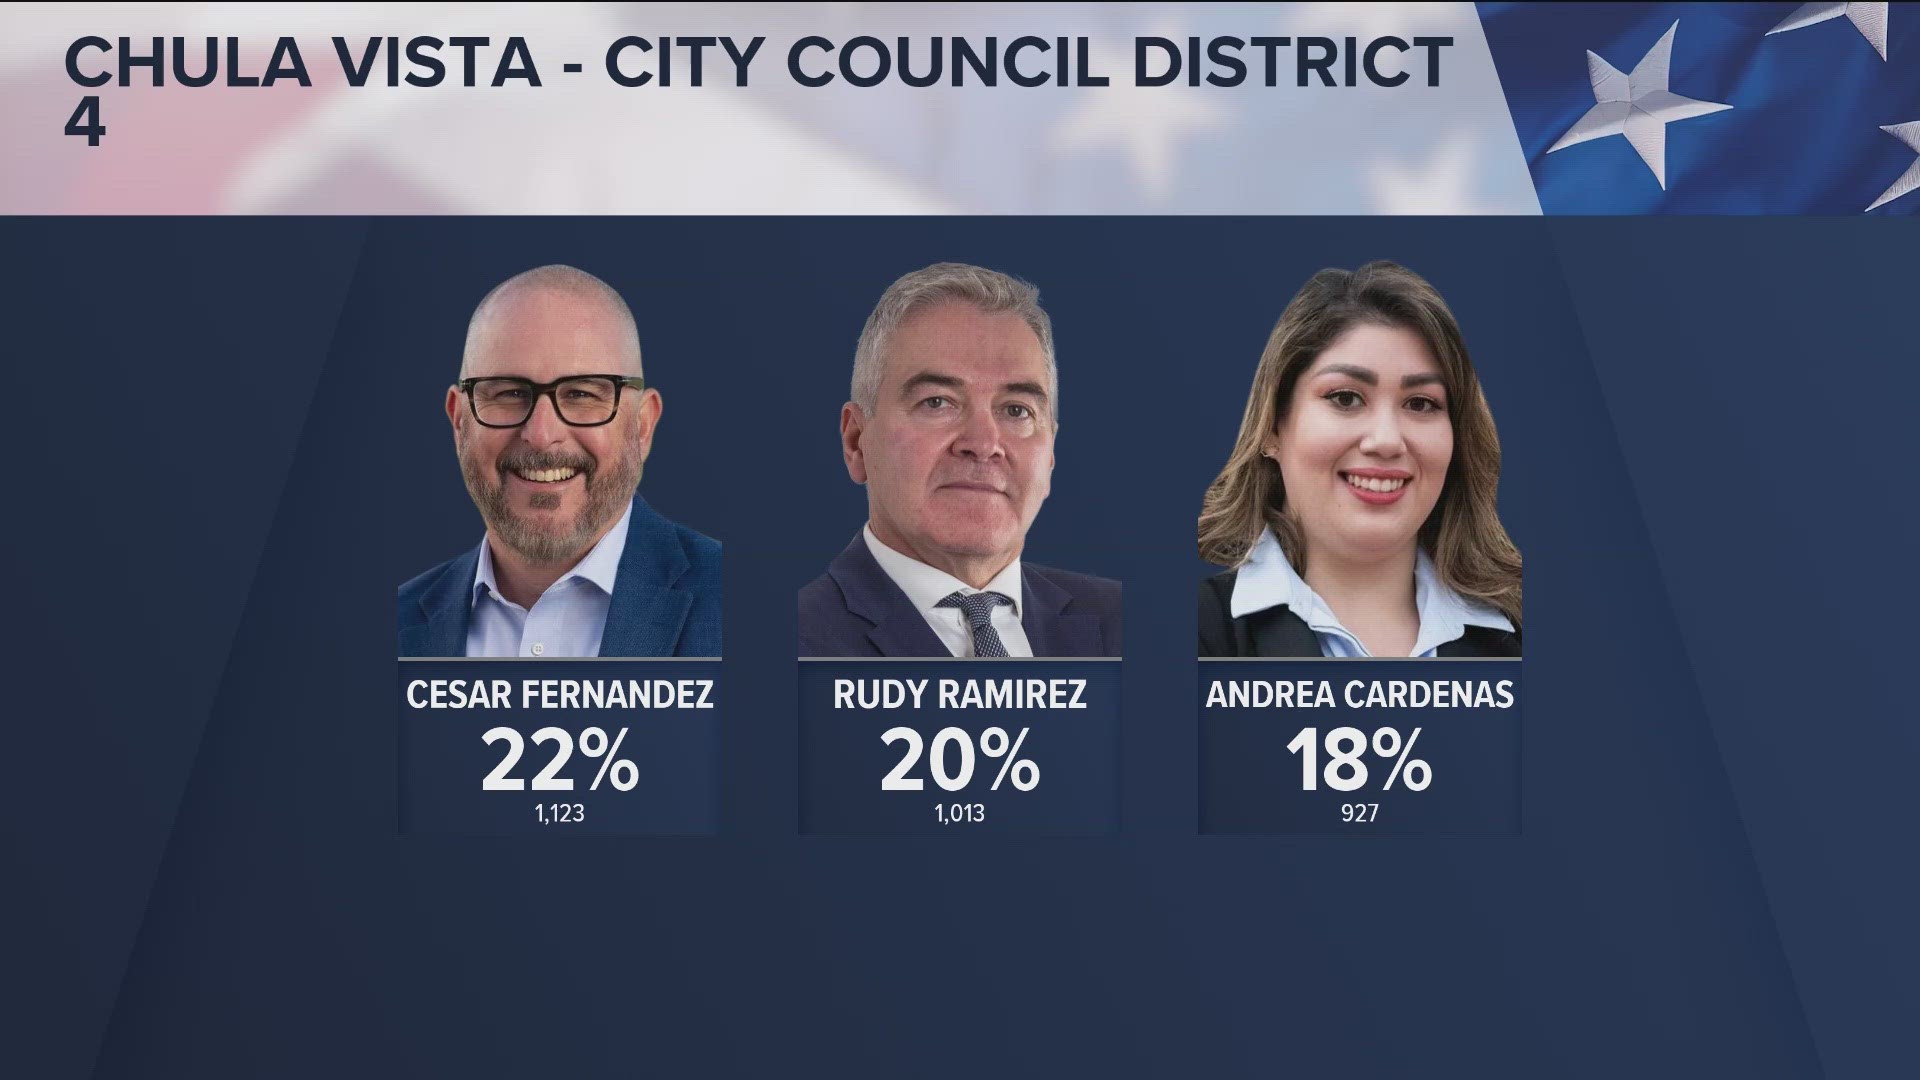 Chula Vista voters will choose the next City Attorney in a special election as well as two city council seats.